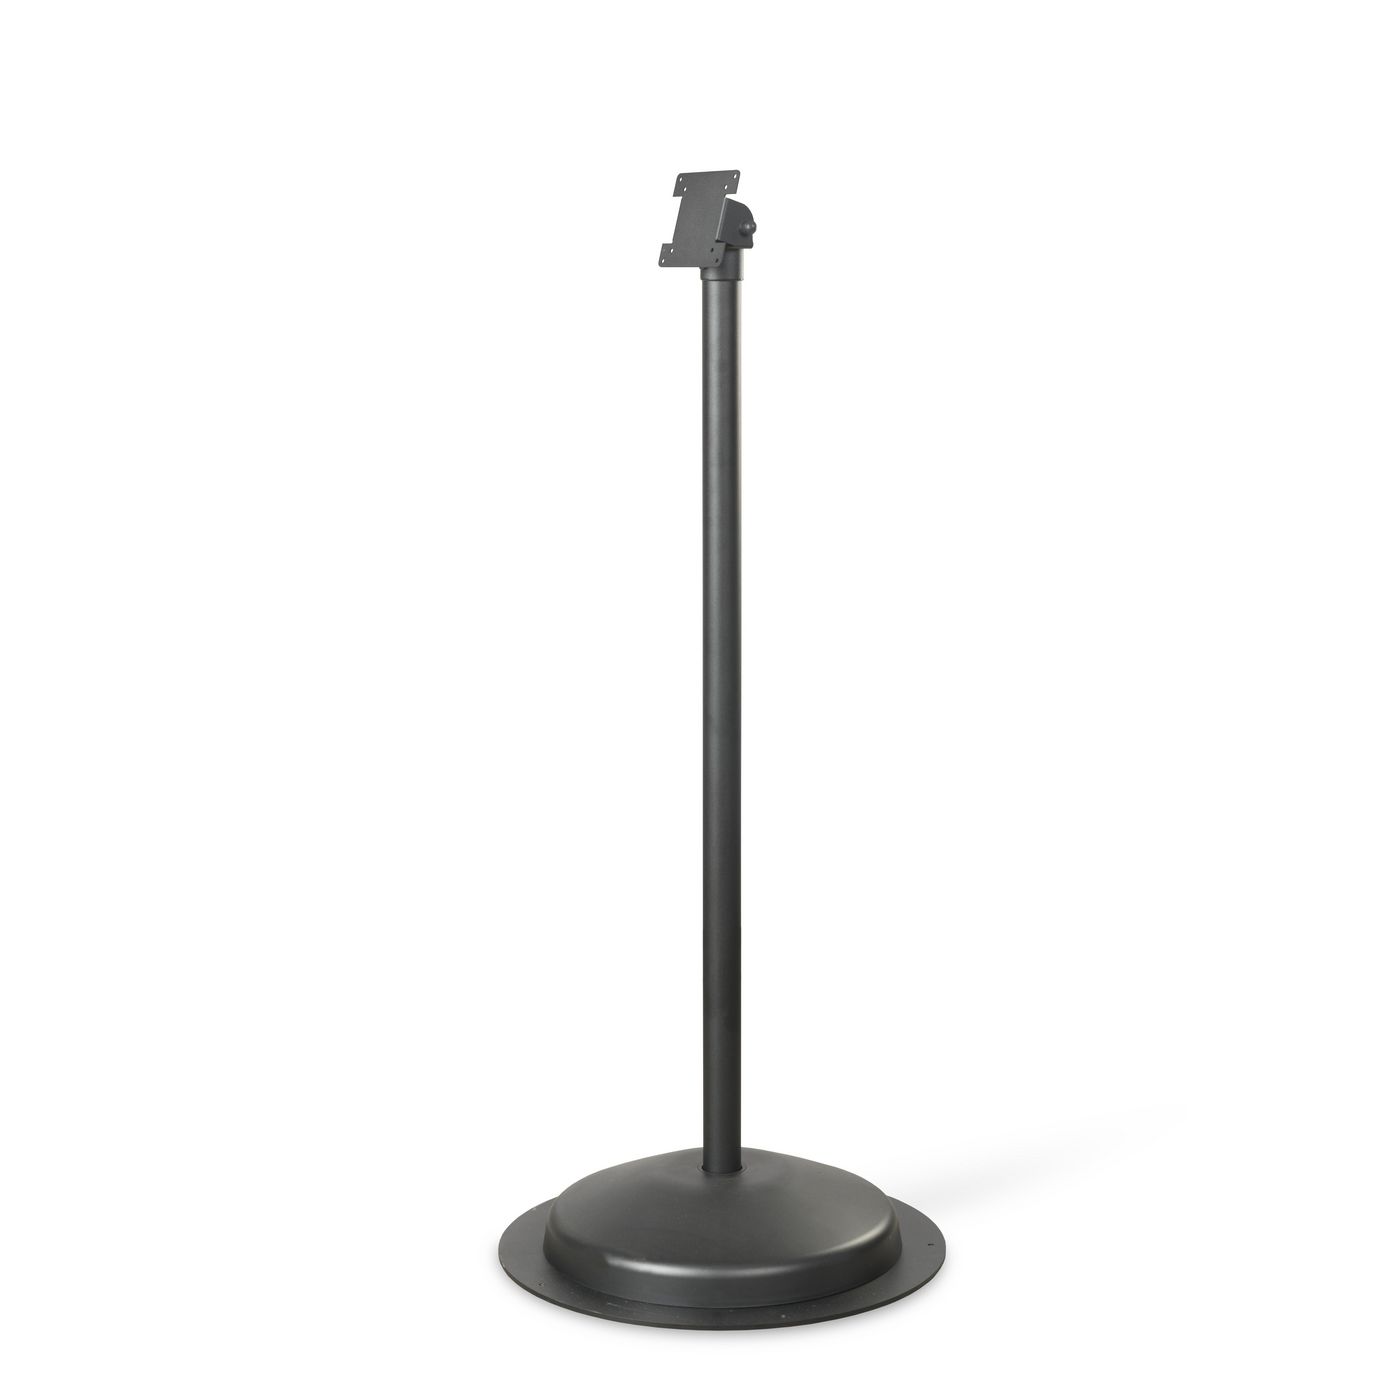 Ergonomic-Solutions SPV1201-H-FX-02 W126320871 Floor stand, 1000mm with 